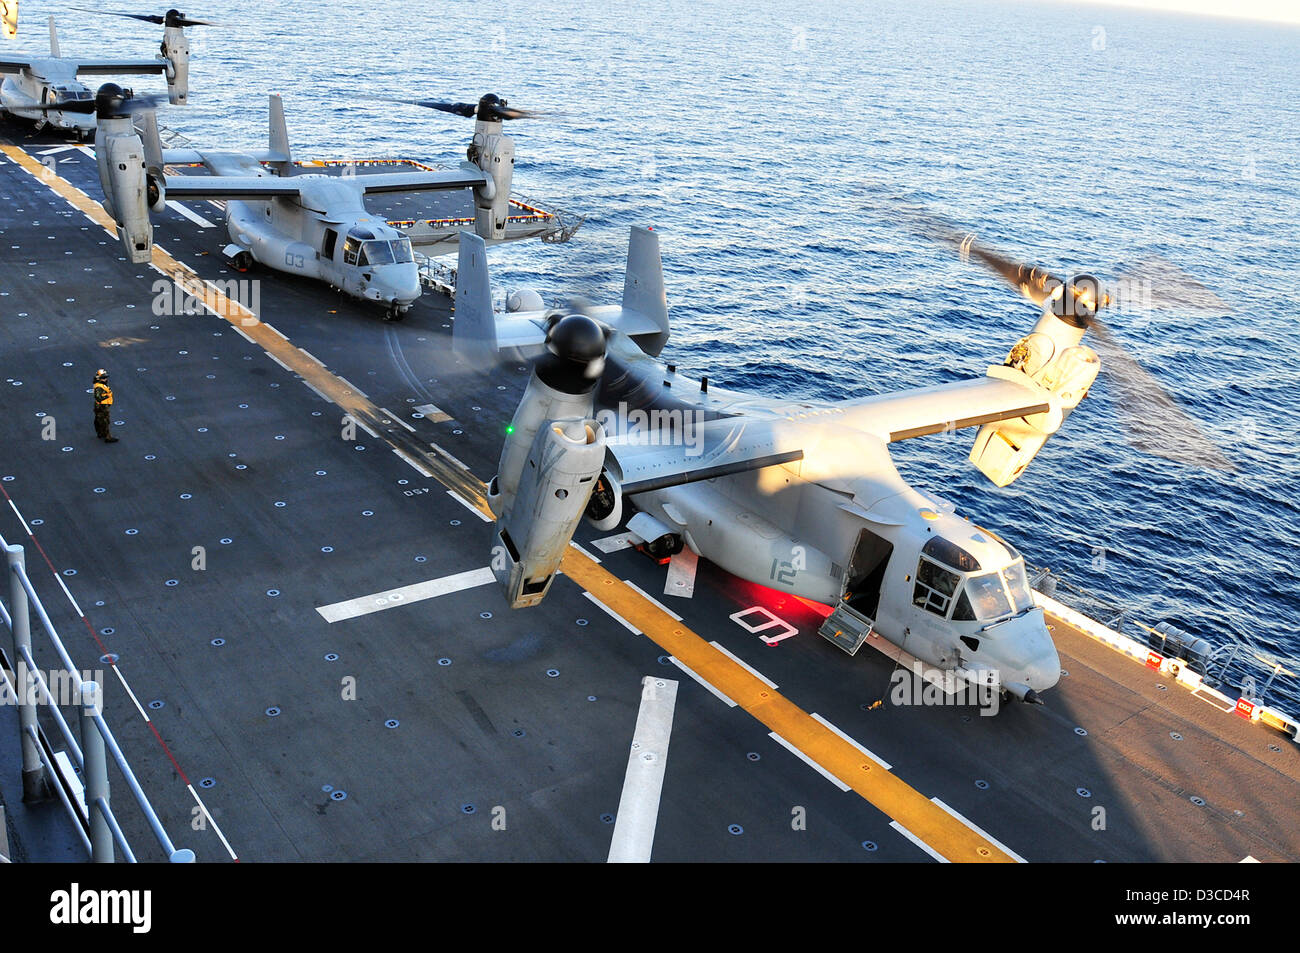 US Navy MV-22 Osprey aircraft line up to take off from the multipurpose amphibious assault ship USS Boxer February 13, 2013 underway off the coast of California. Stock Photo